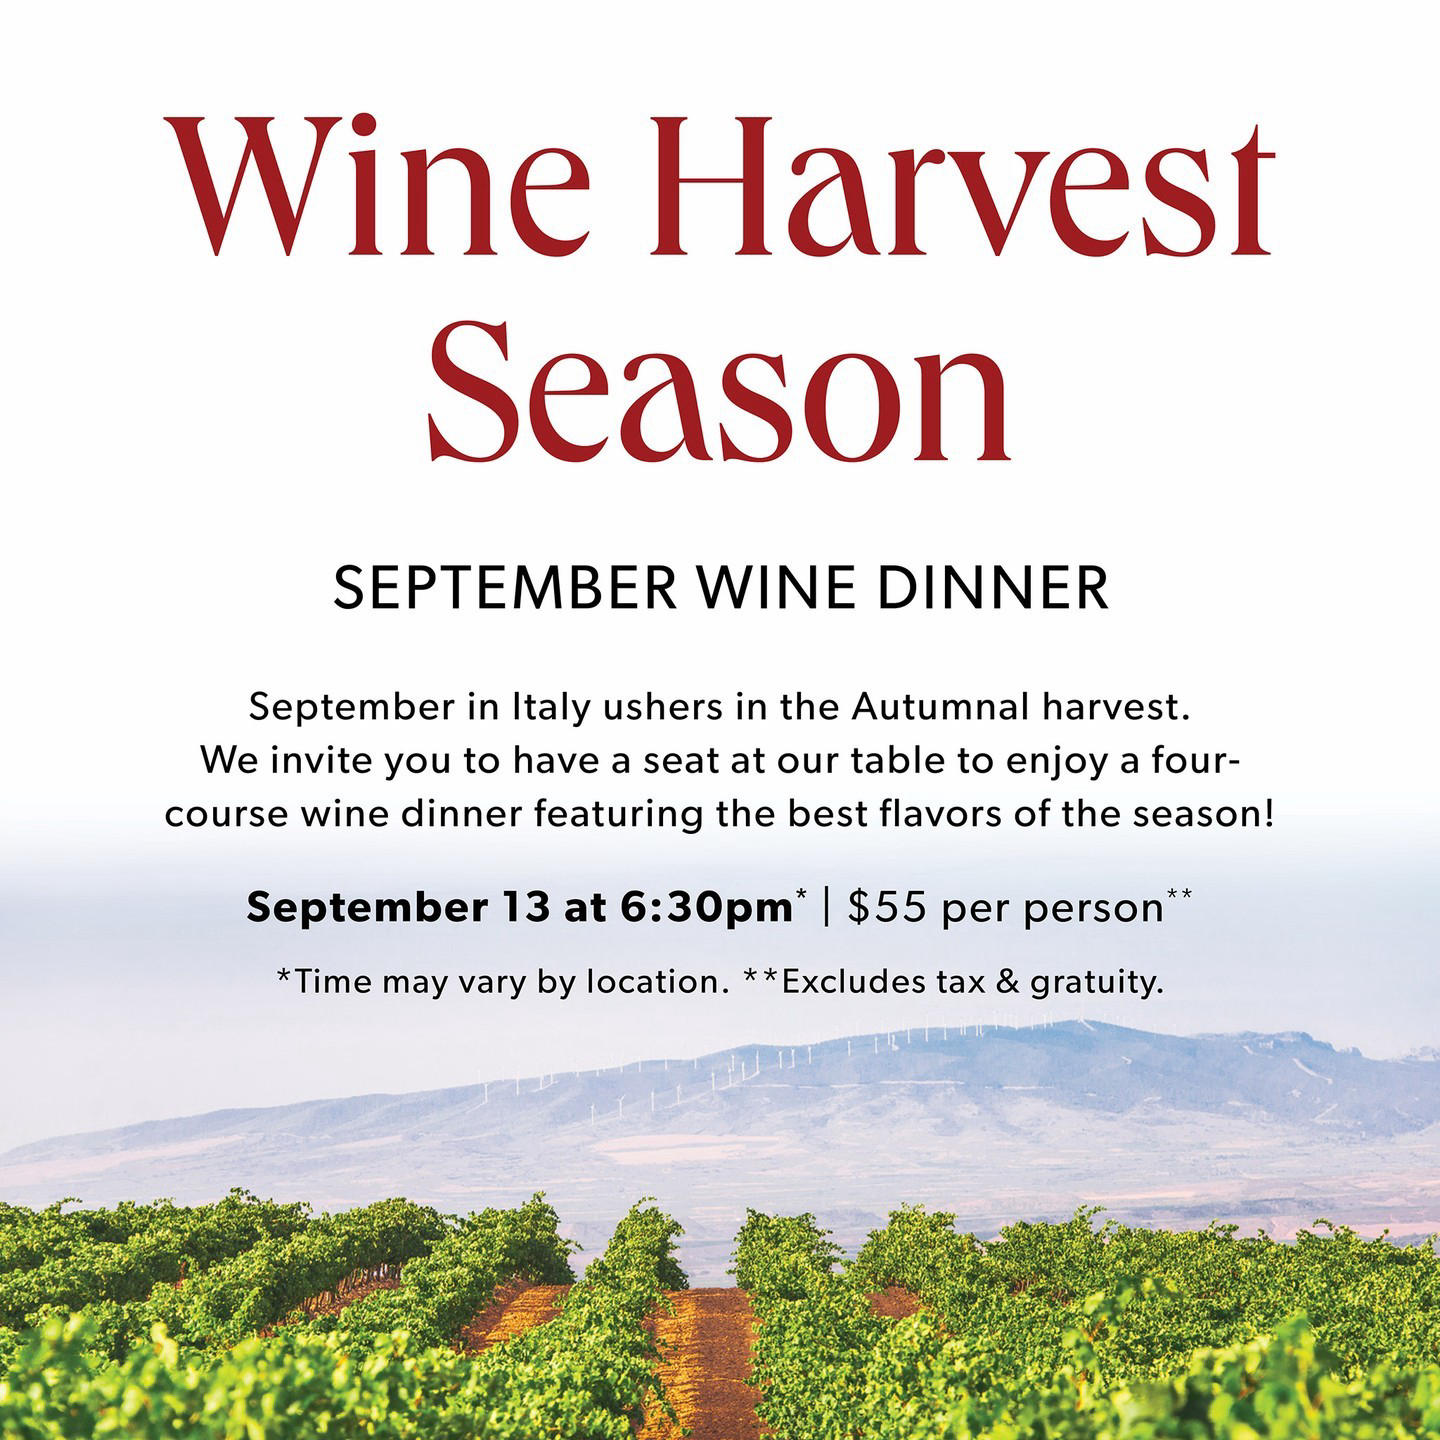 image  1 Carrabba's Italian Grill - You're invited to our Wine Harvest Season wine dinner on Sept 13th